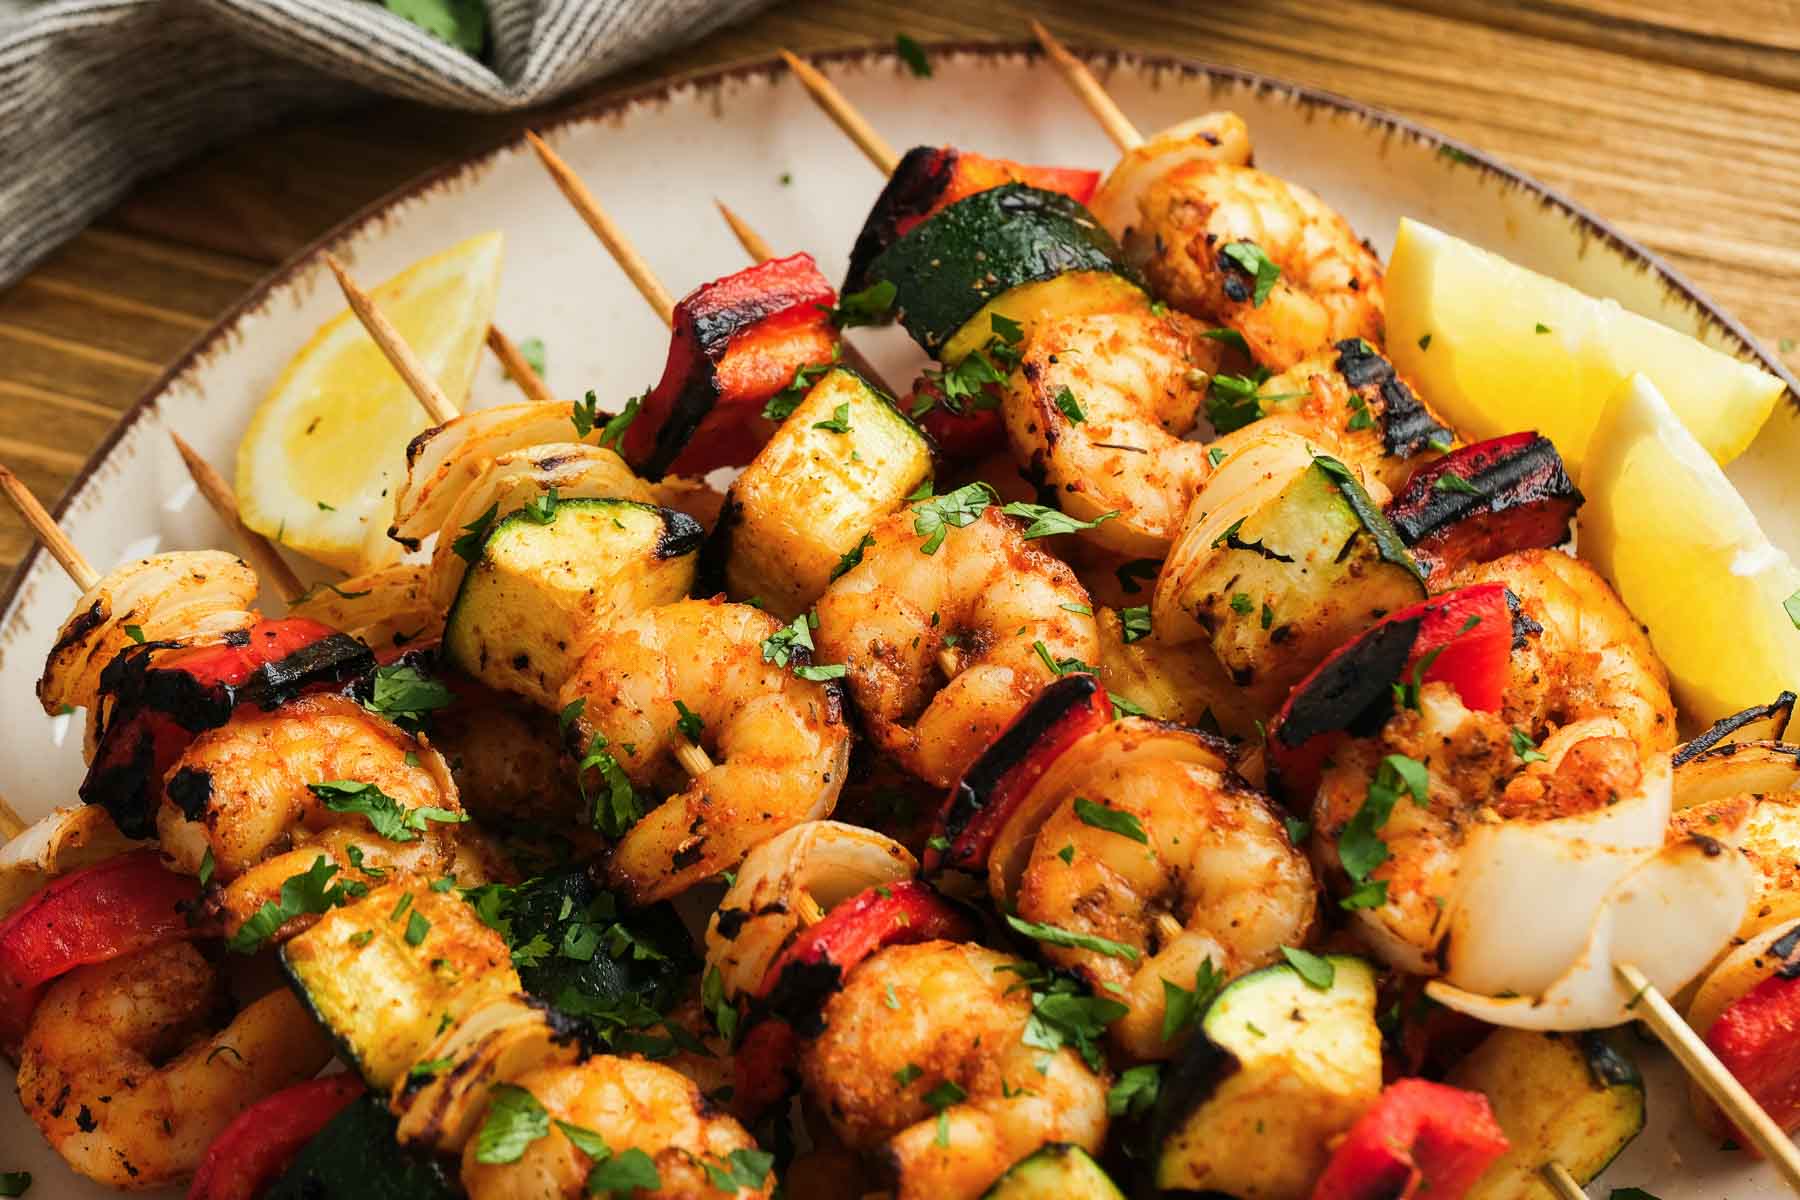 horizontal view of a plate loaded with ten juicy grilled shrimp kabobs with veggies